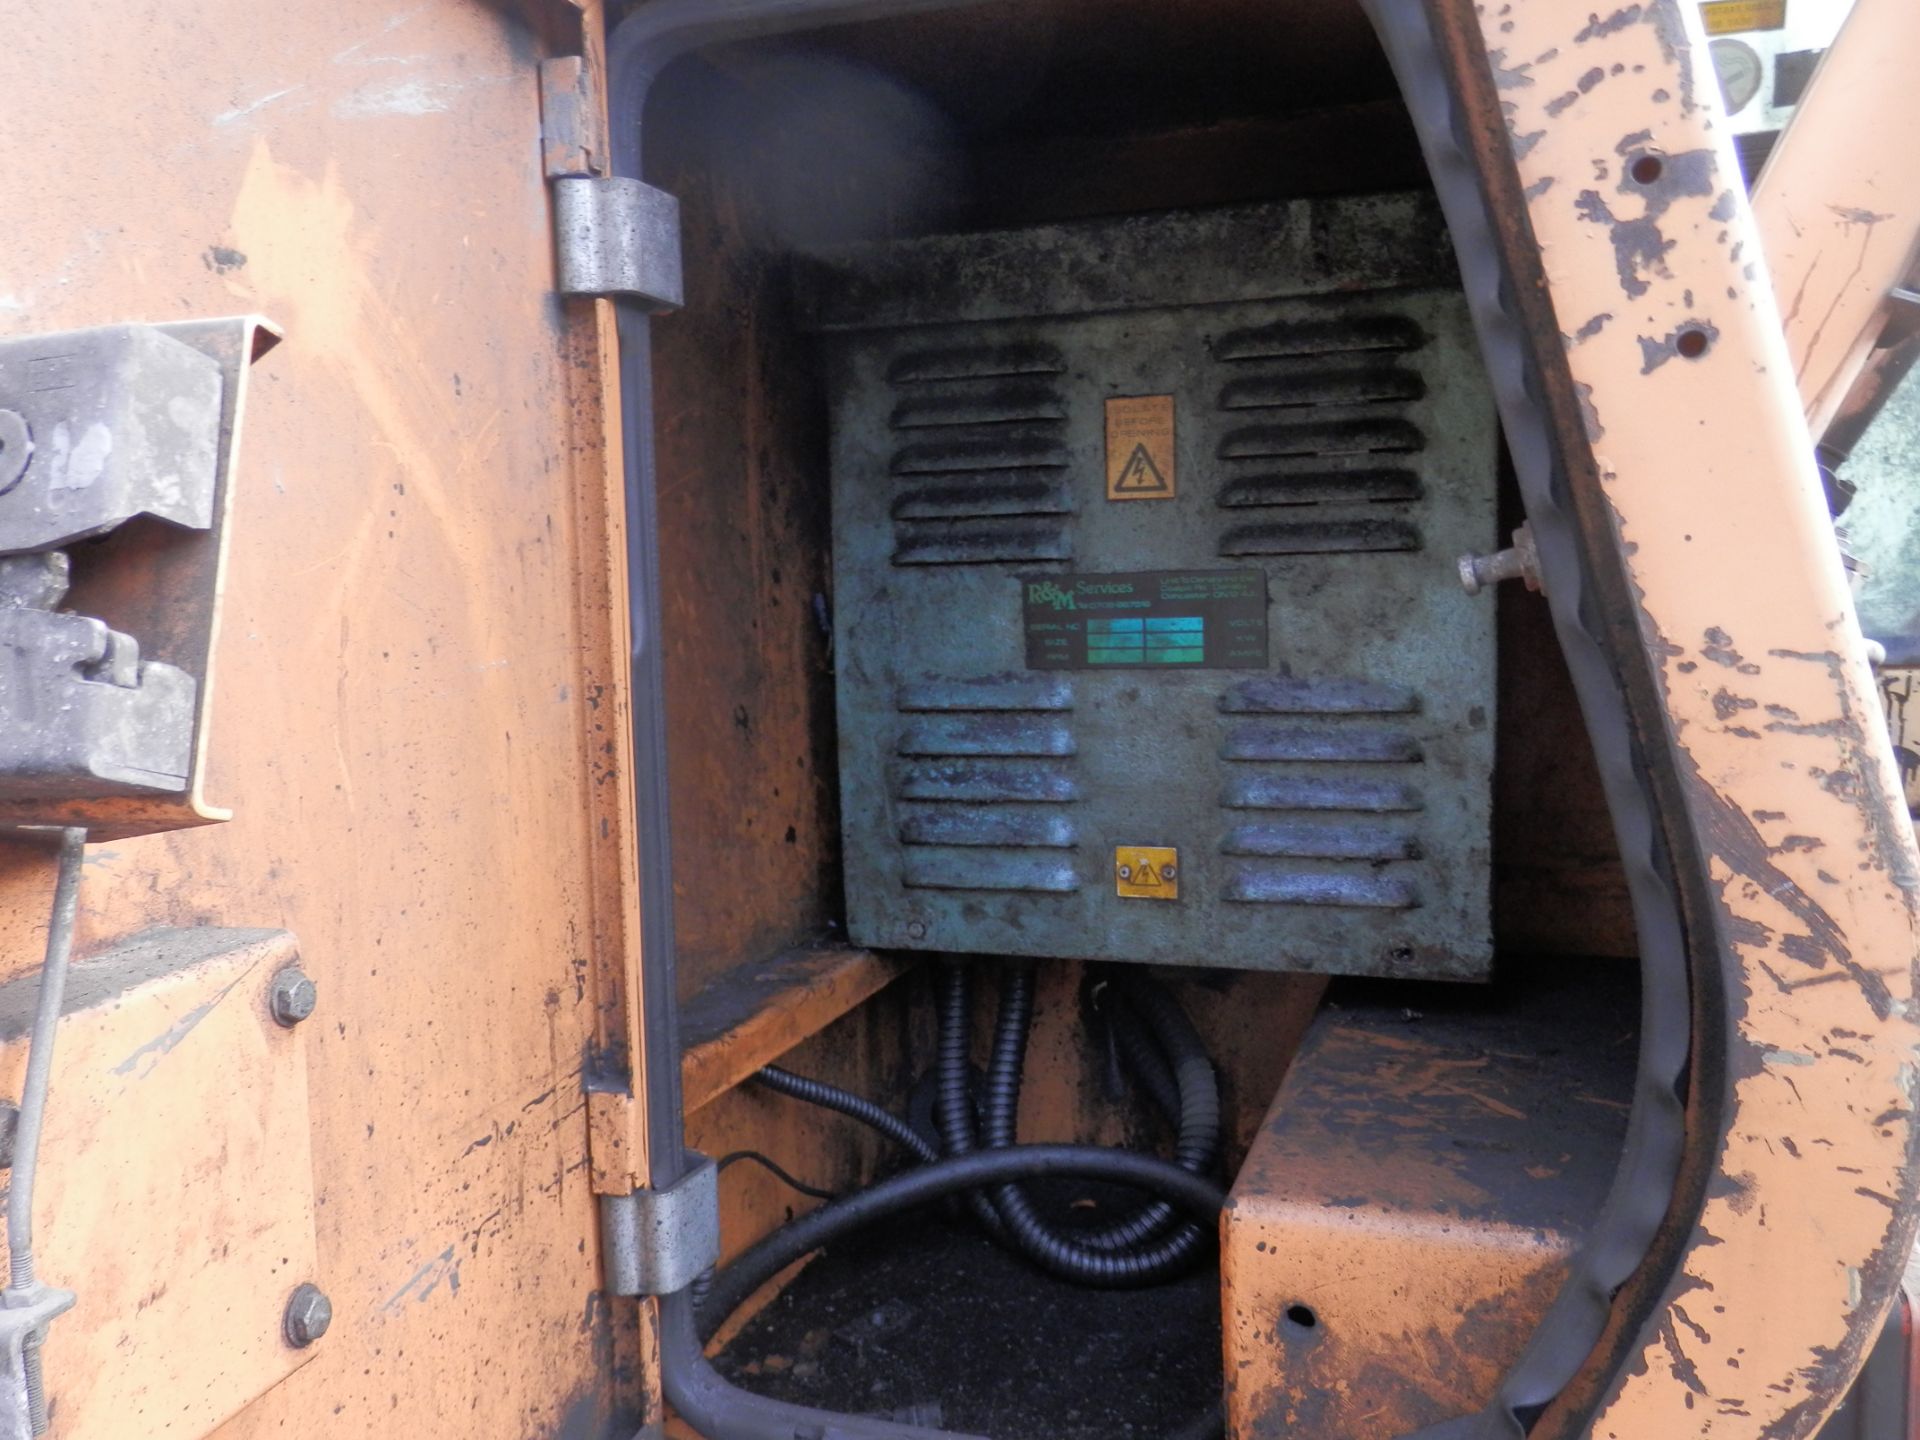 ALL WORKING CASE 688BP 17.2 TONNE DIGGER, 65KW DIESEL ENGINE & MAGNETIC LIFT ATTACHMENT INCLUDED. - Image 13 of 17